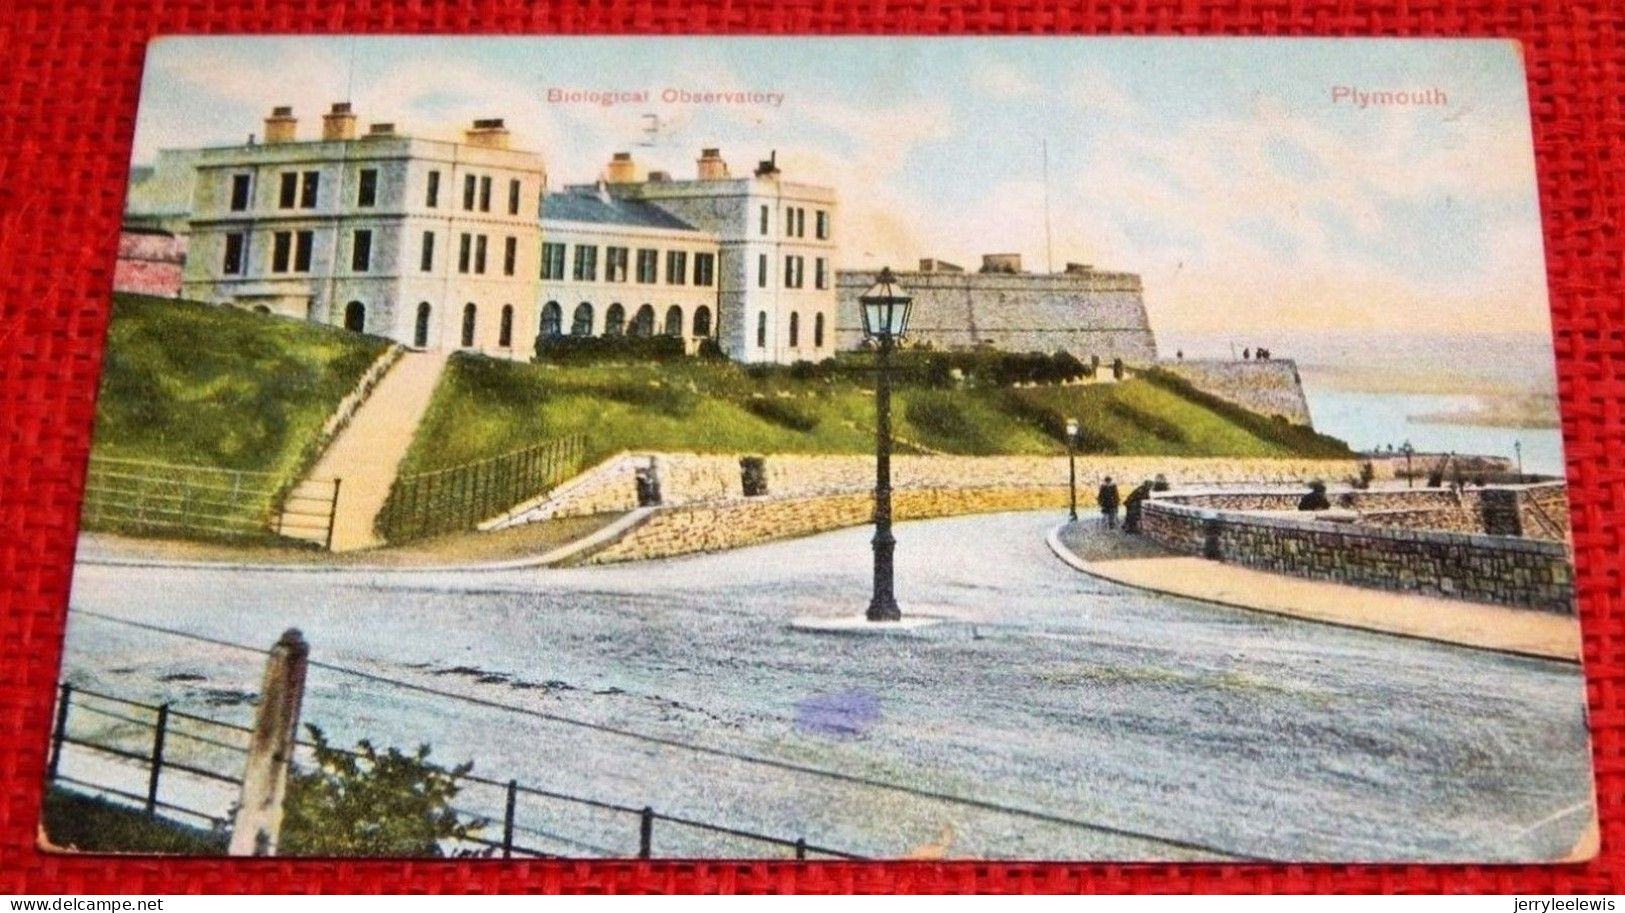 PLYMOUTH -   Biological Observatory   -  1918 - Plymouth